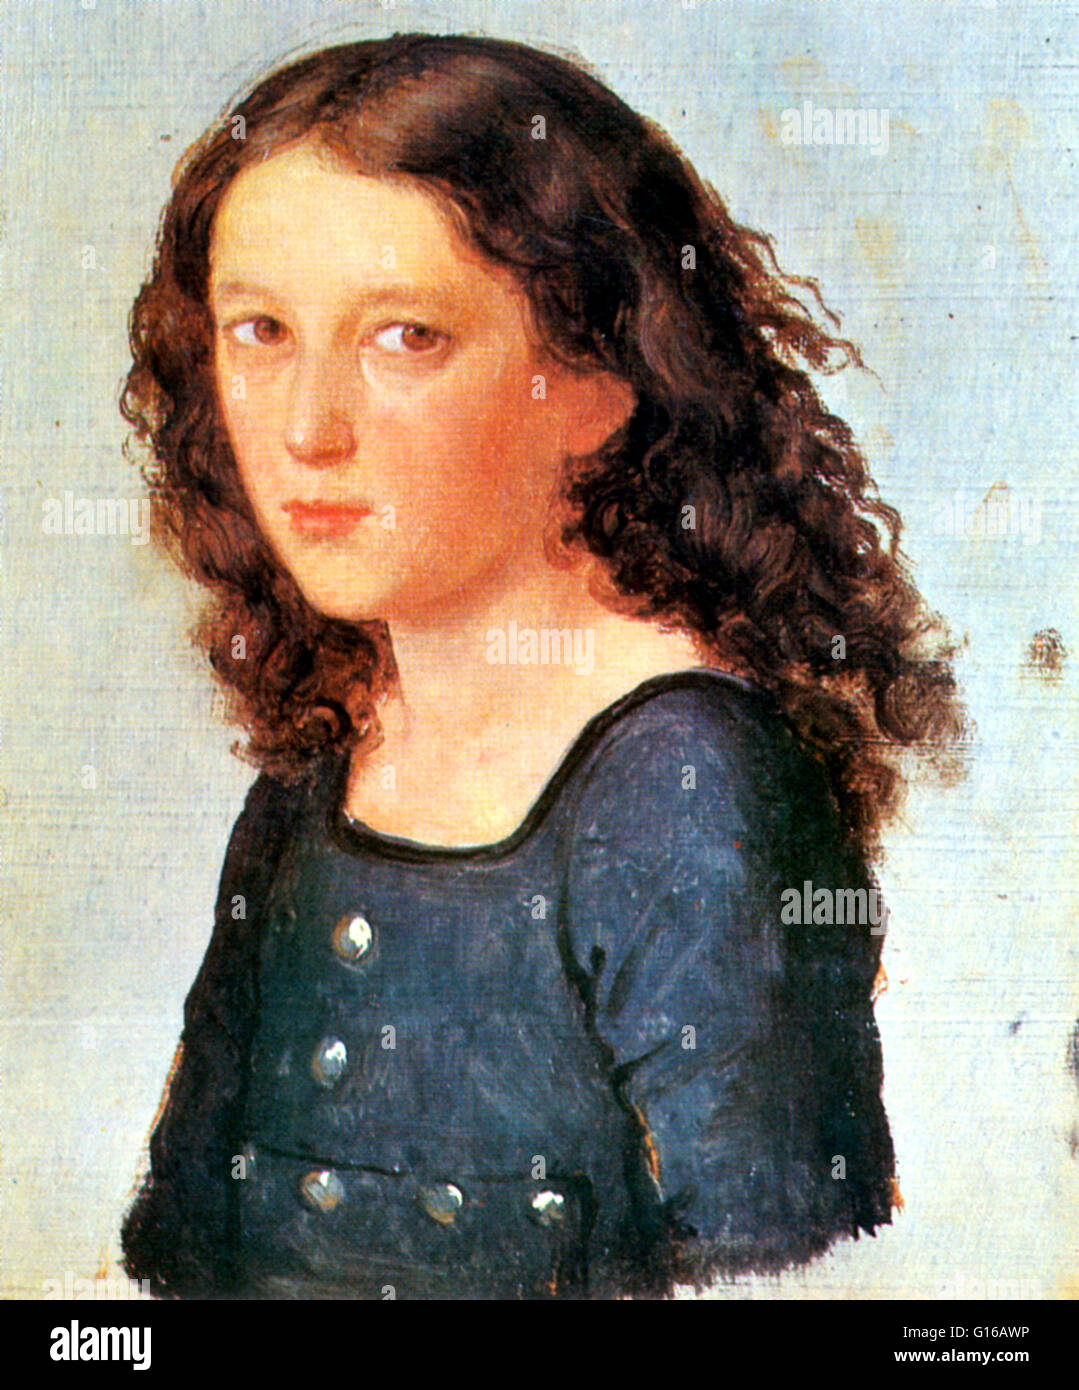 Painting of Mendelssohn, aged 12. Jakob Ludwig Felix Mendelssohn Bartholdy (February 3, 1809 - November 4, 1847) was a German composer, pianist, organist and conductor of the early Romantic period. A grandson of the philosopher Moses Mendelssohn. He was a Stock Photo